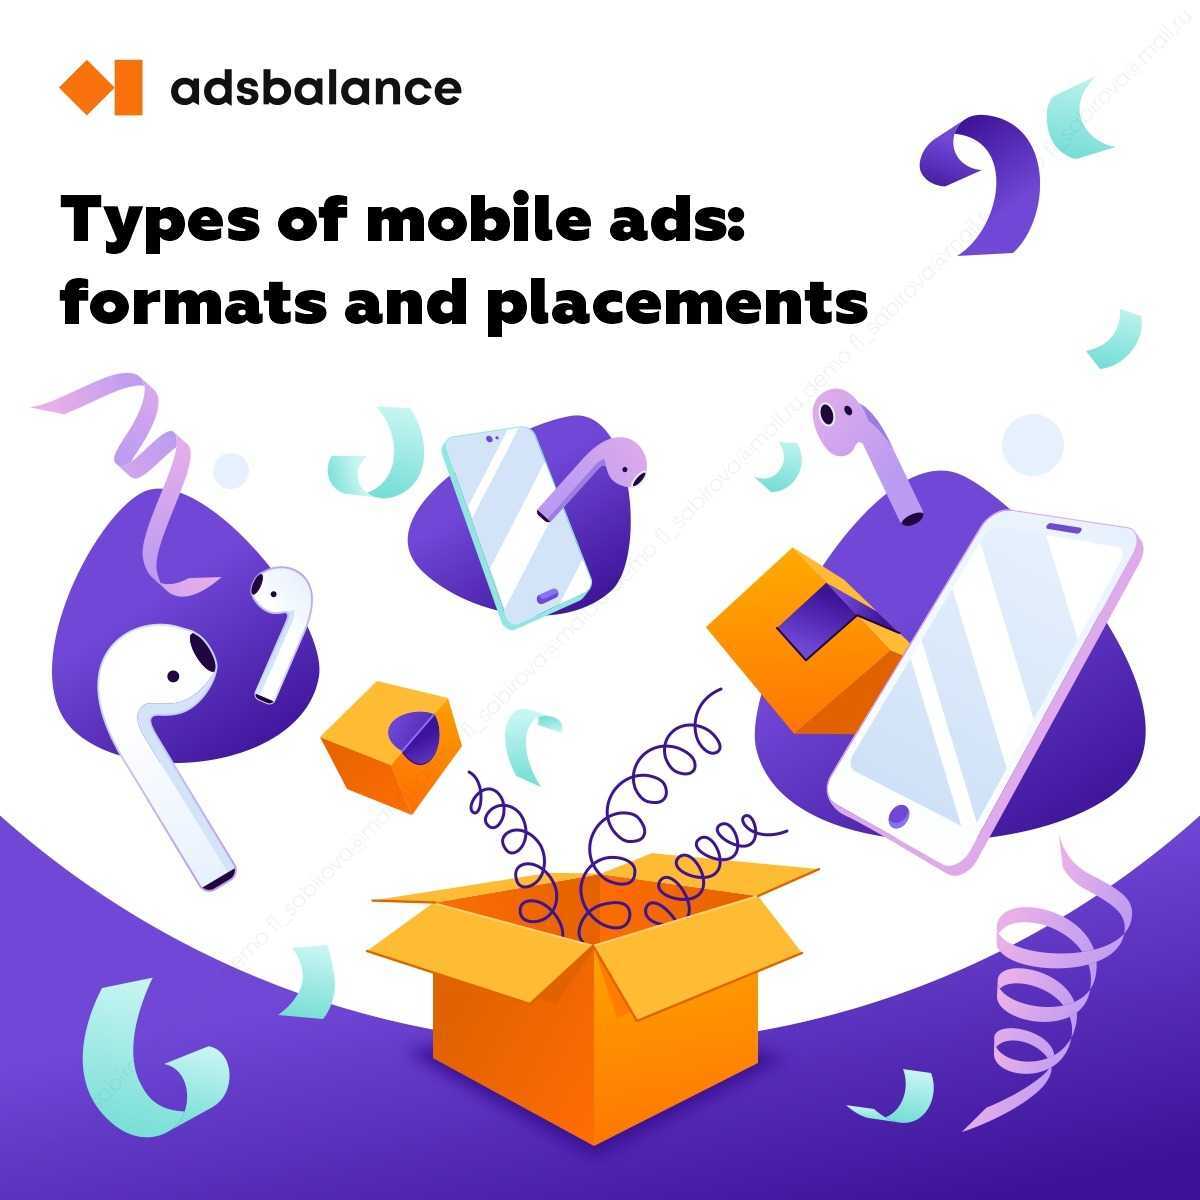 Types of mobile ad formats and placements